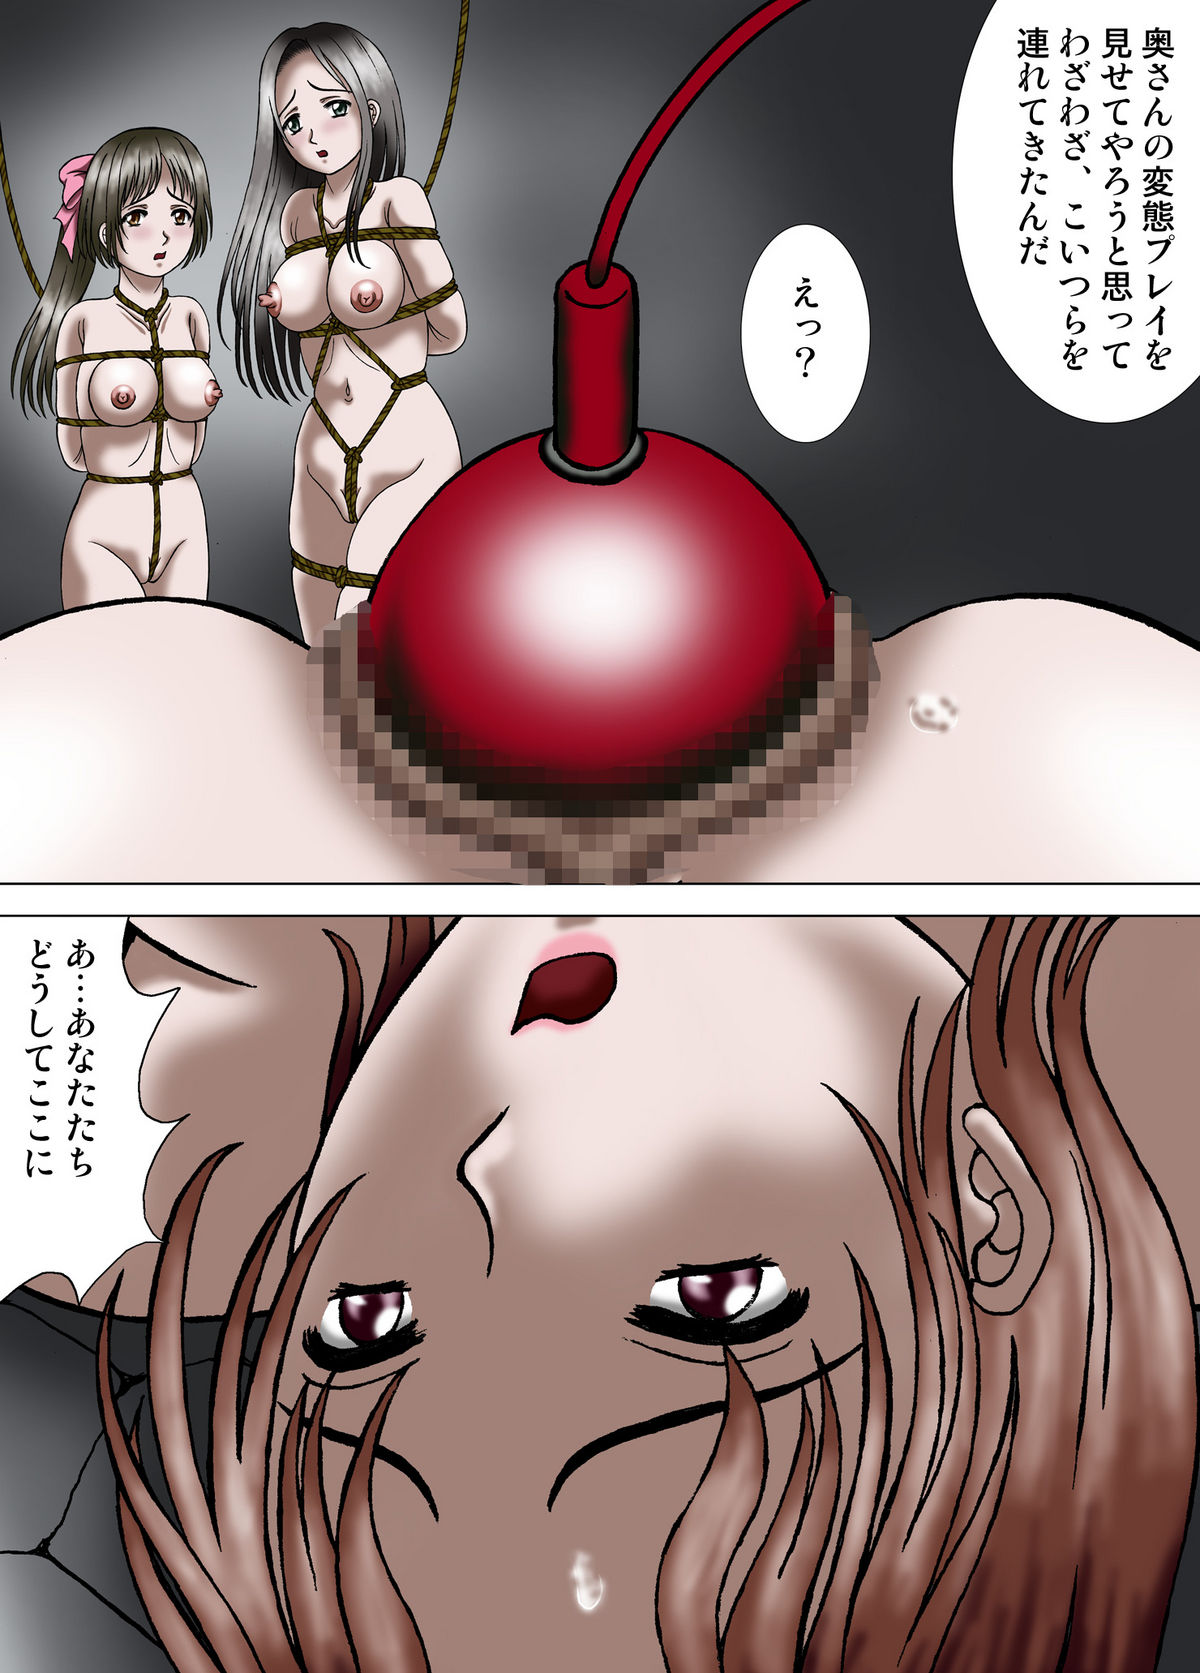 [Kesshousui] Mother and Daughter, Given Leg Split [Aka (Seki)] 読者を釣った架空のエロ漫画 (Touhou Project)